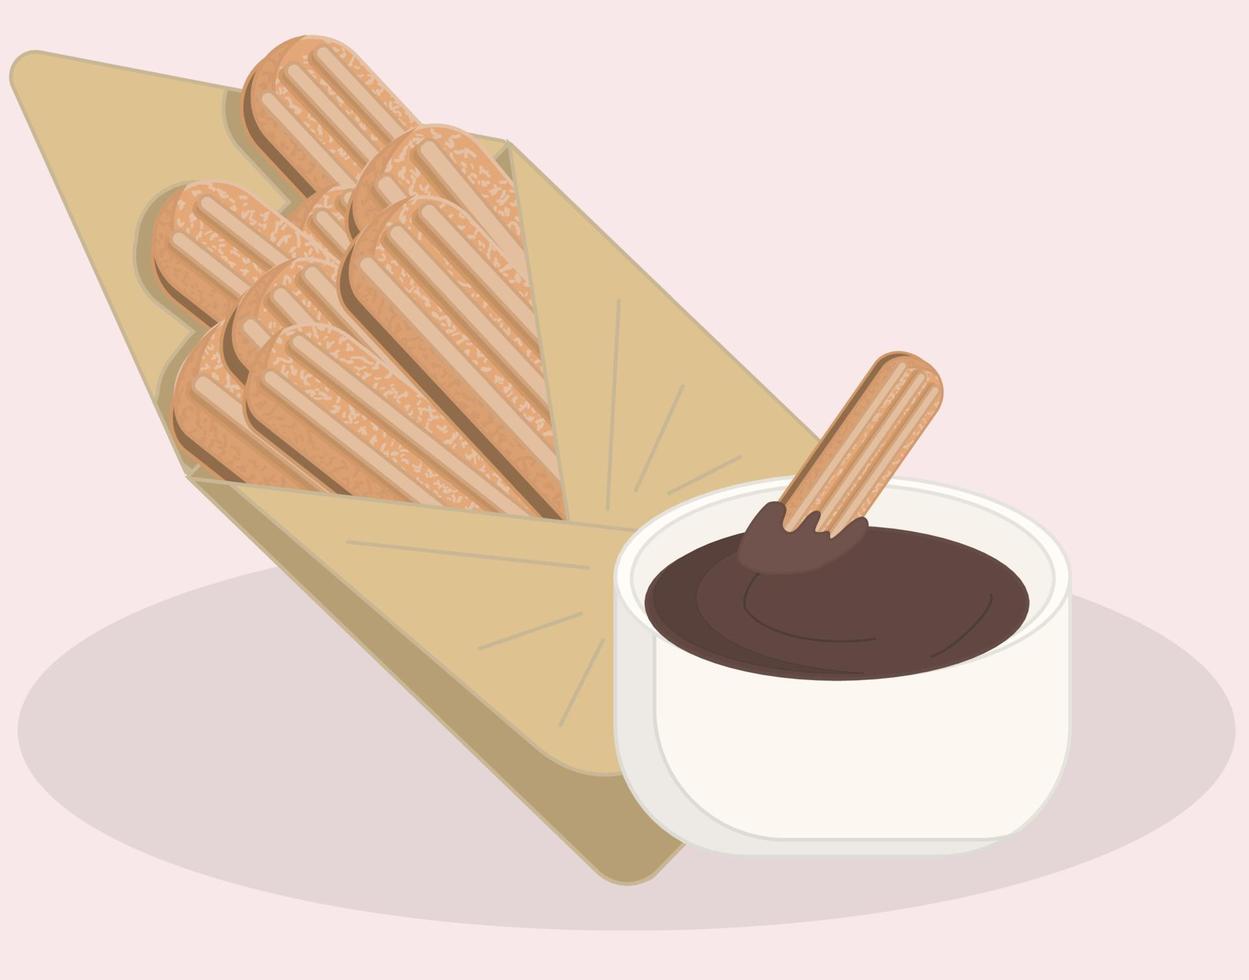 Mexican food churros in an envelope with chocolate sauce. Vector illustration